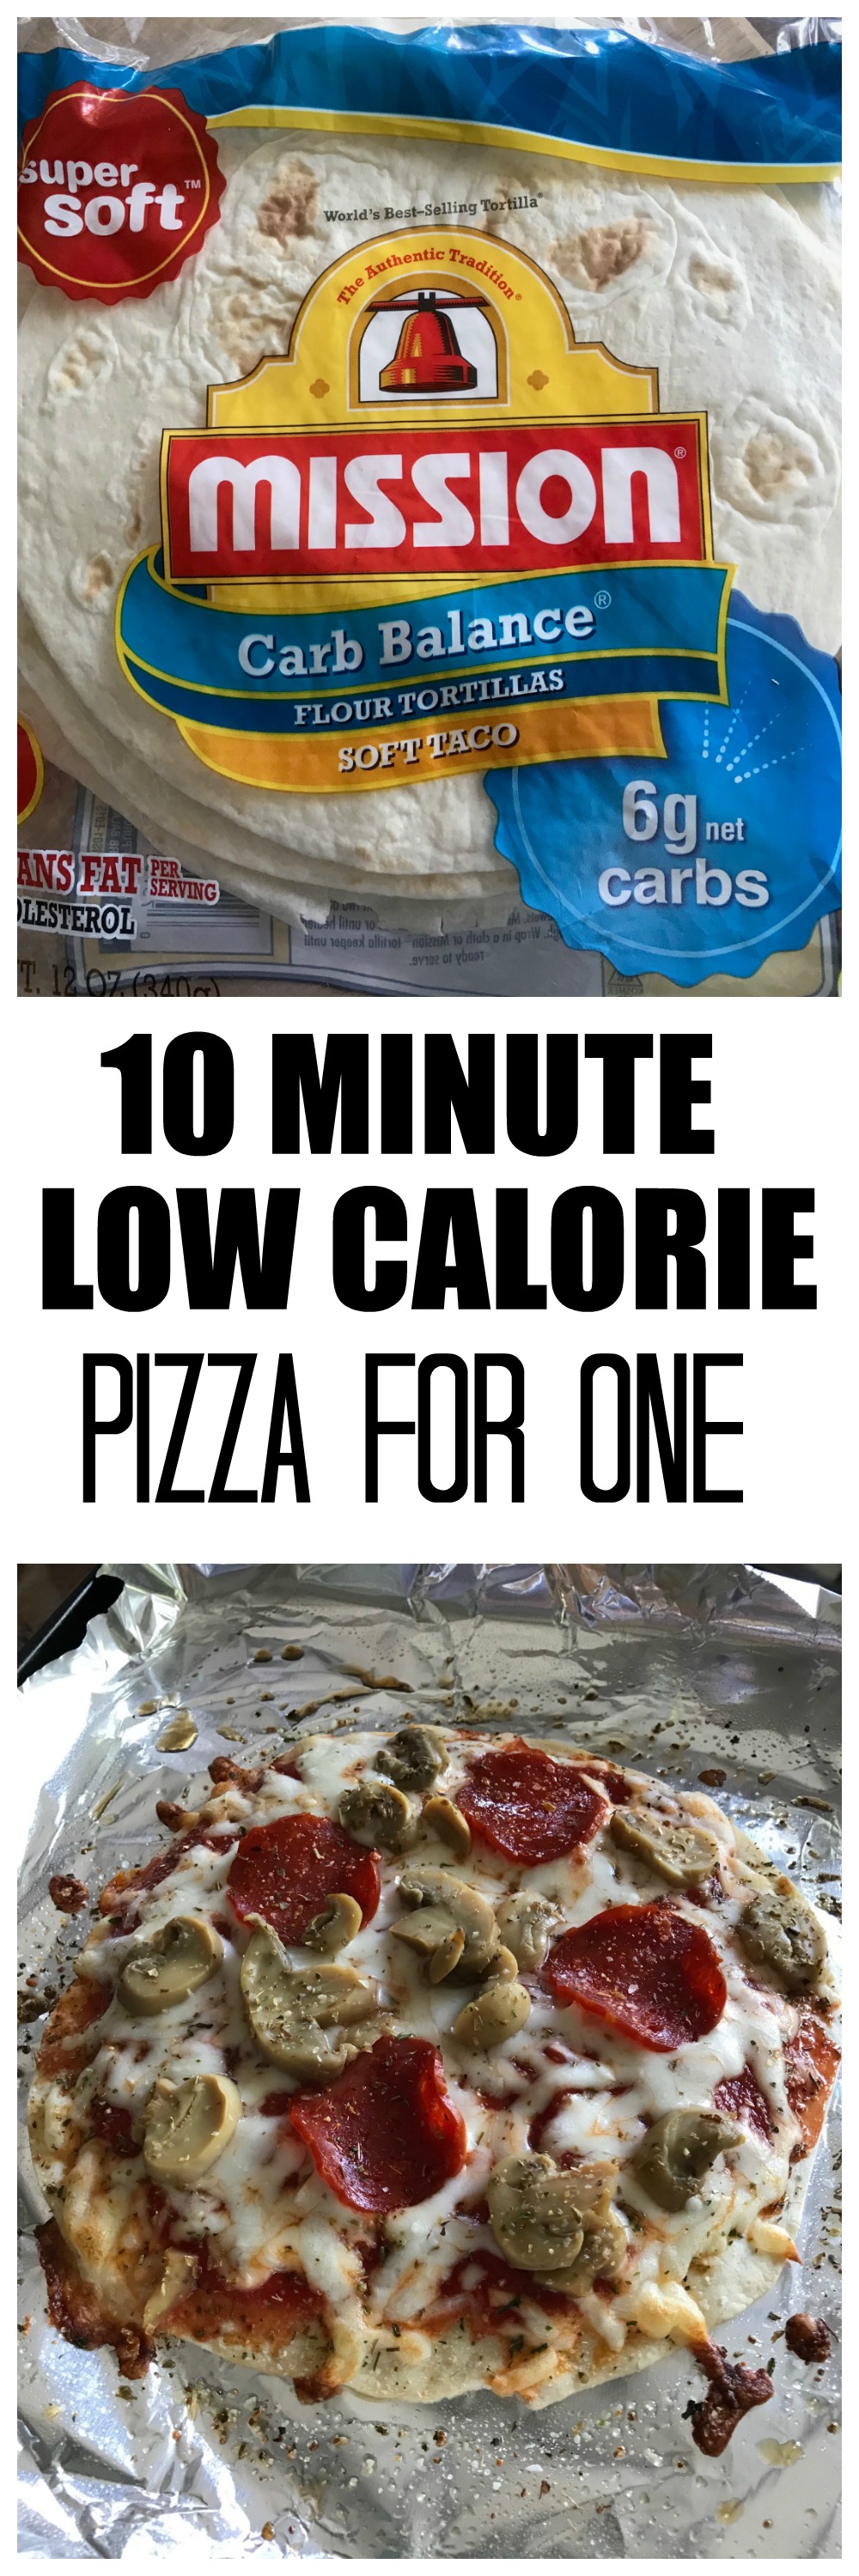 It's hard to believe that this 271 Calorie Pizza for one can actually help you lose weight! This 10 minute pizza recipe is included in this article.